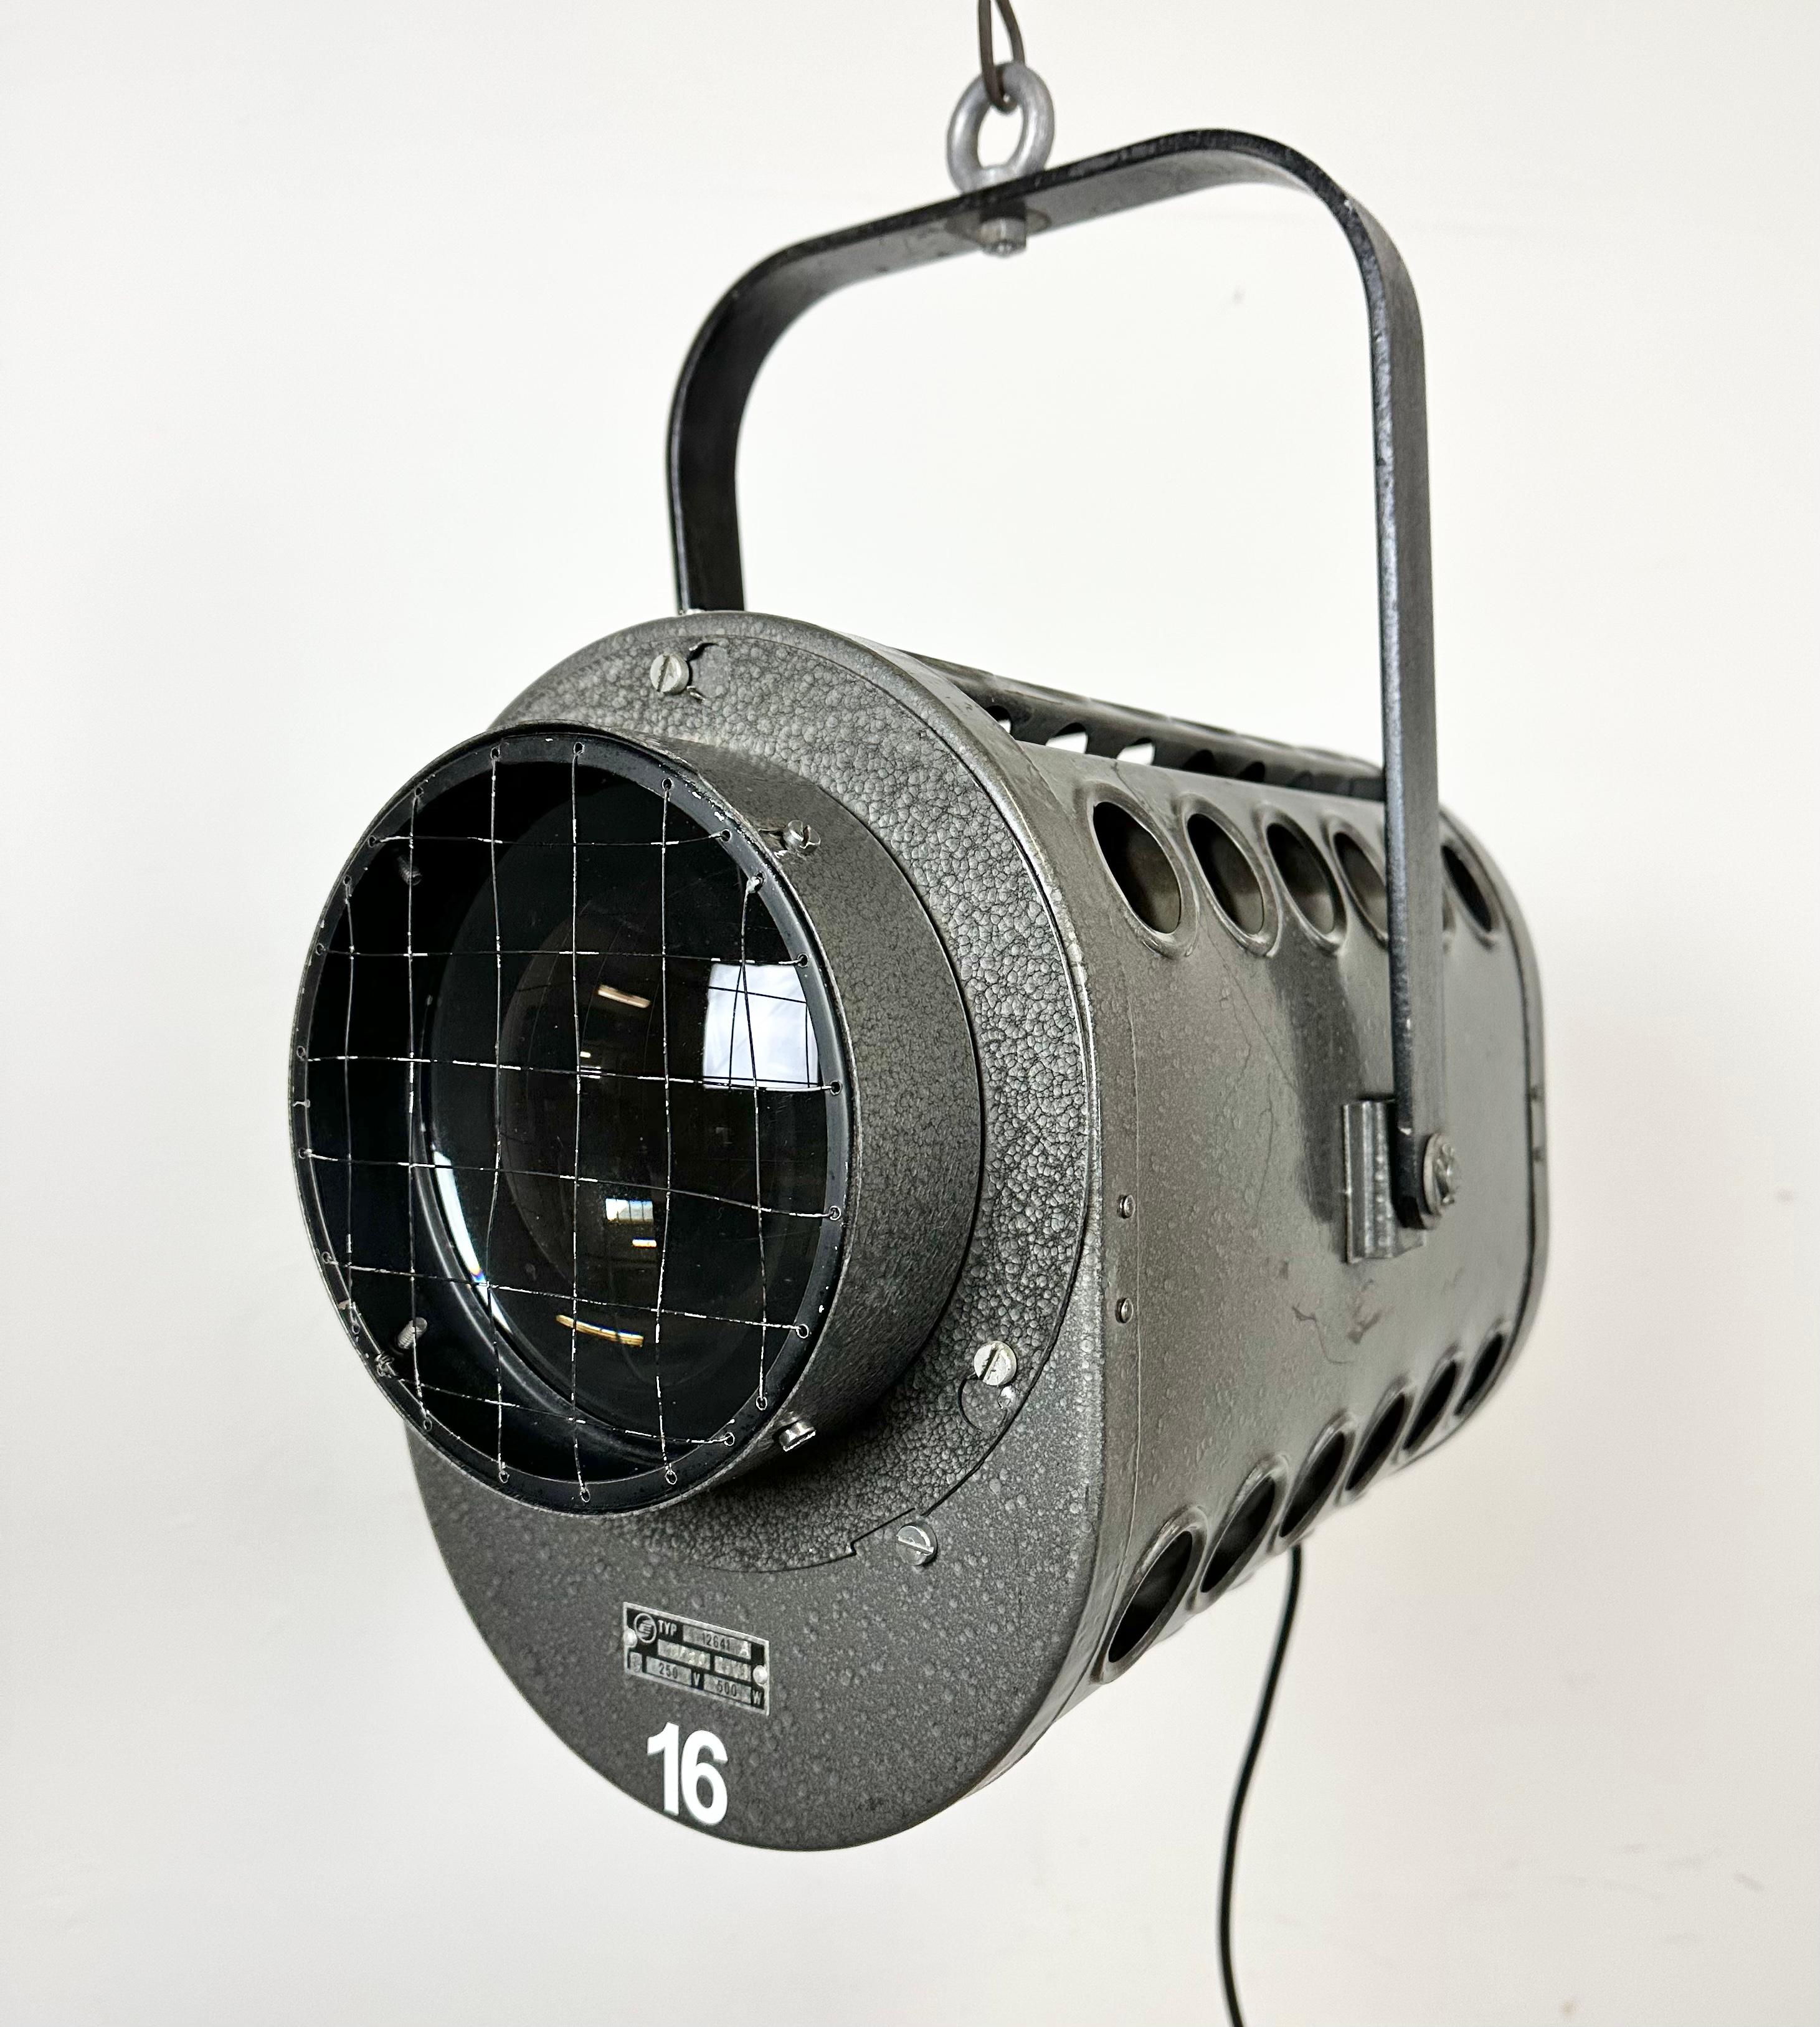 - Vintage theatre spotlight made by Elektrosvit  in former Czechoslovakia during the 1980s 
- It features a grey hammerpaint metal body and clear glass lens cover
- The porcelain socket requires E27/ E26 lightbulbs 
- New wire
-The height of the